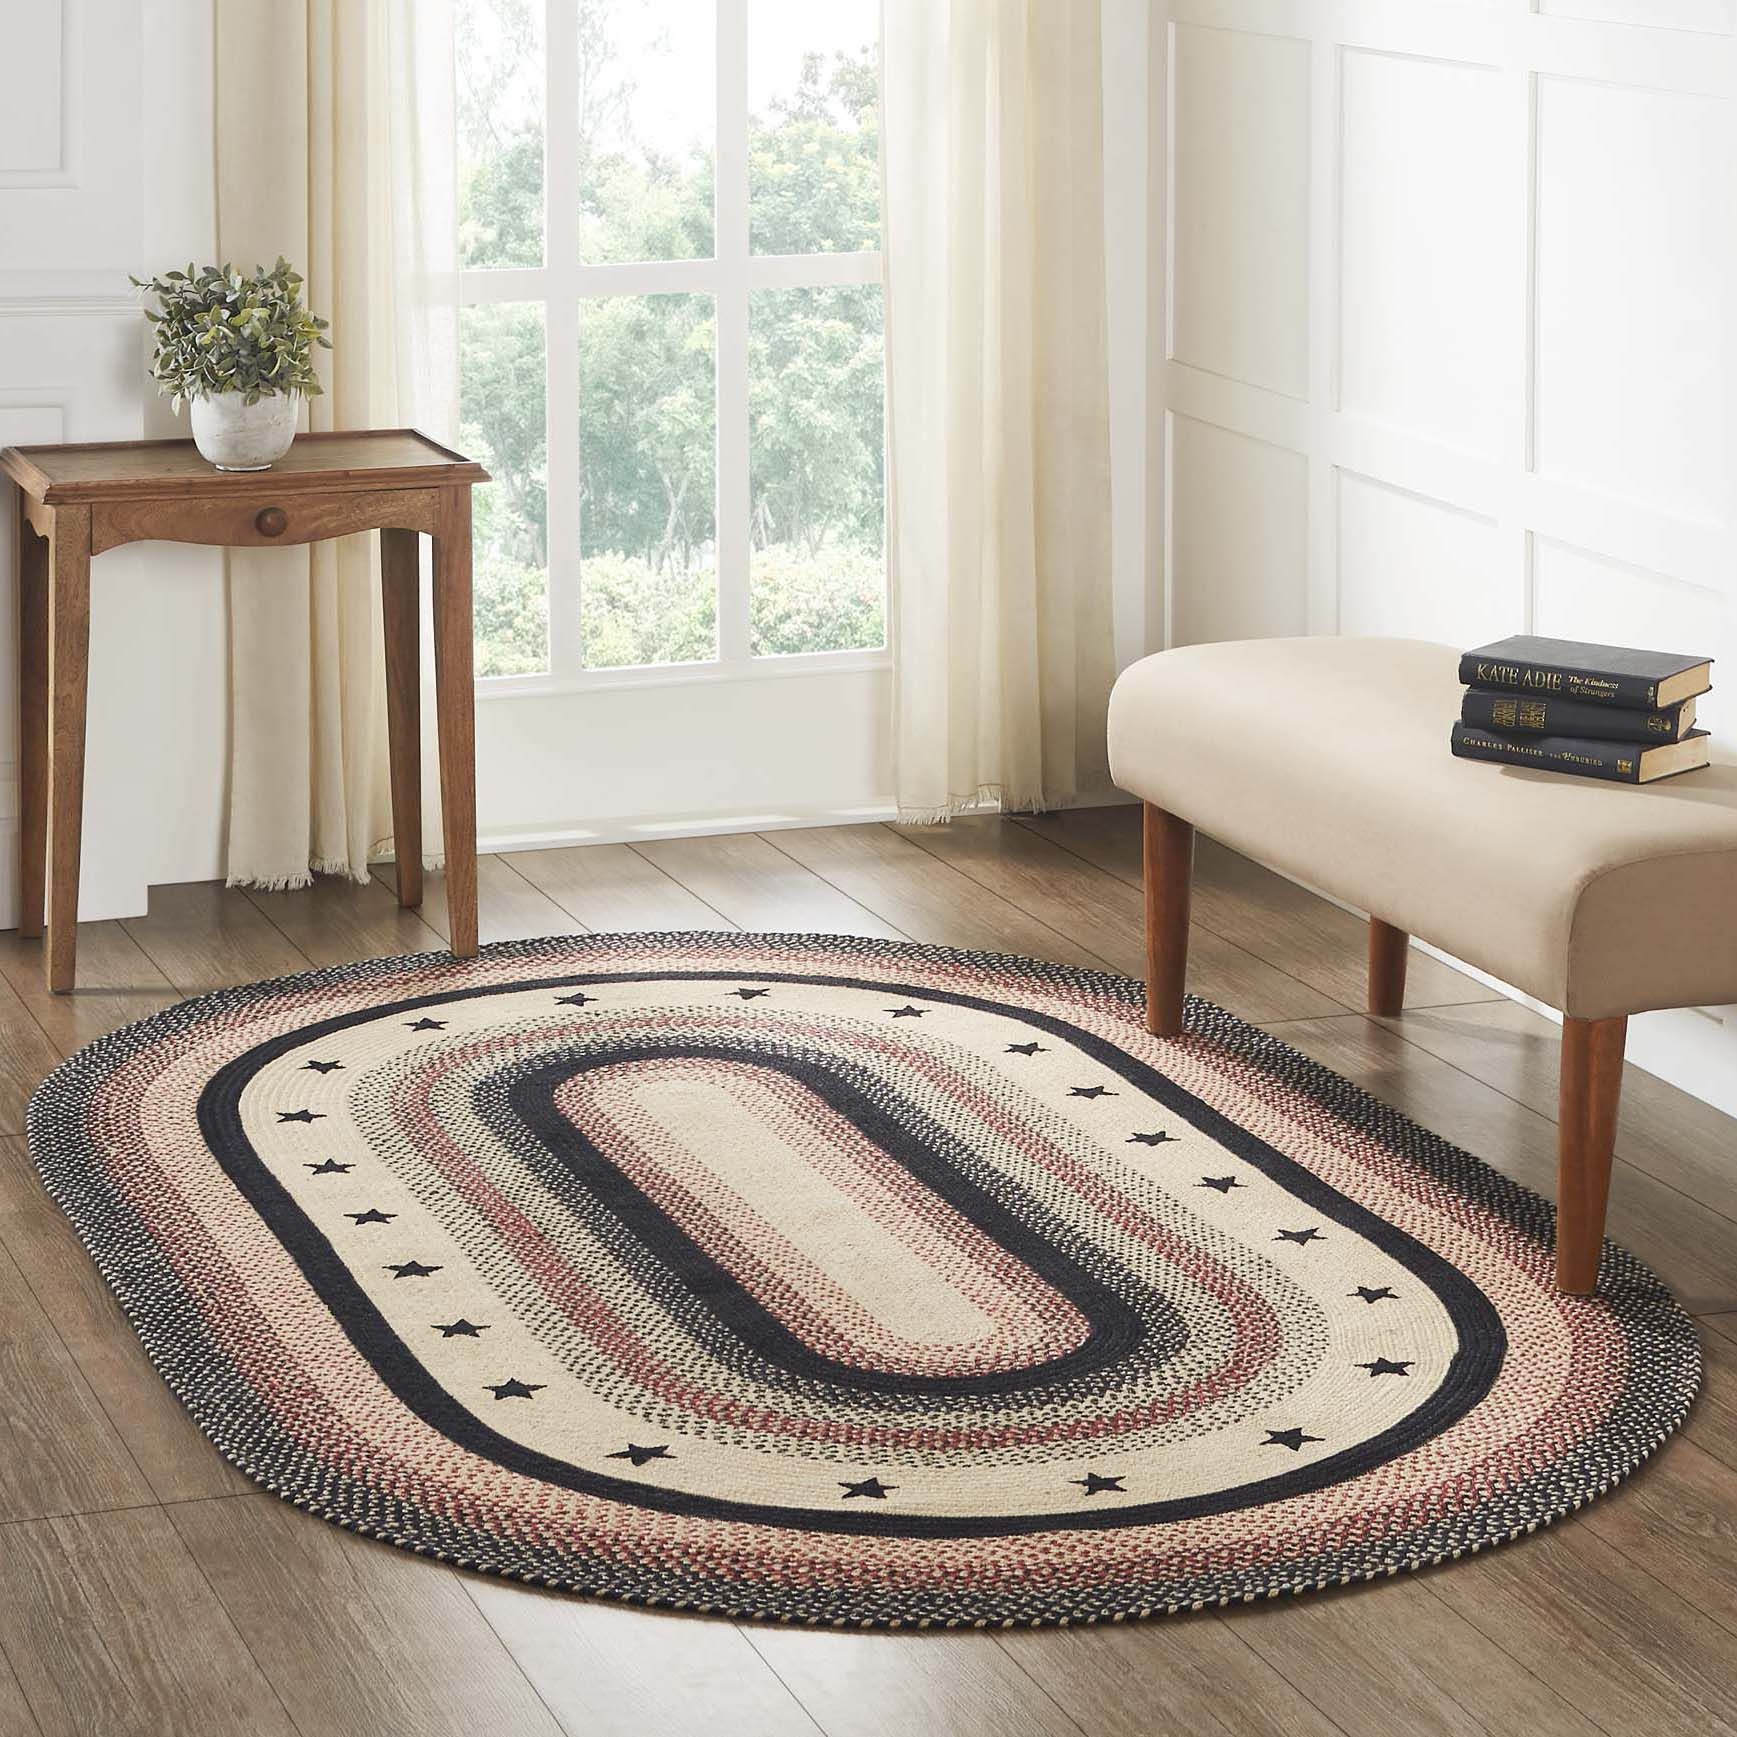 Colonial Star Jute Rug Oval W/ Pad 60x96 – 67009 In Timeless Oval Rugs (Photo 3 of 15)